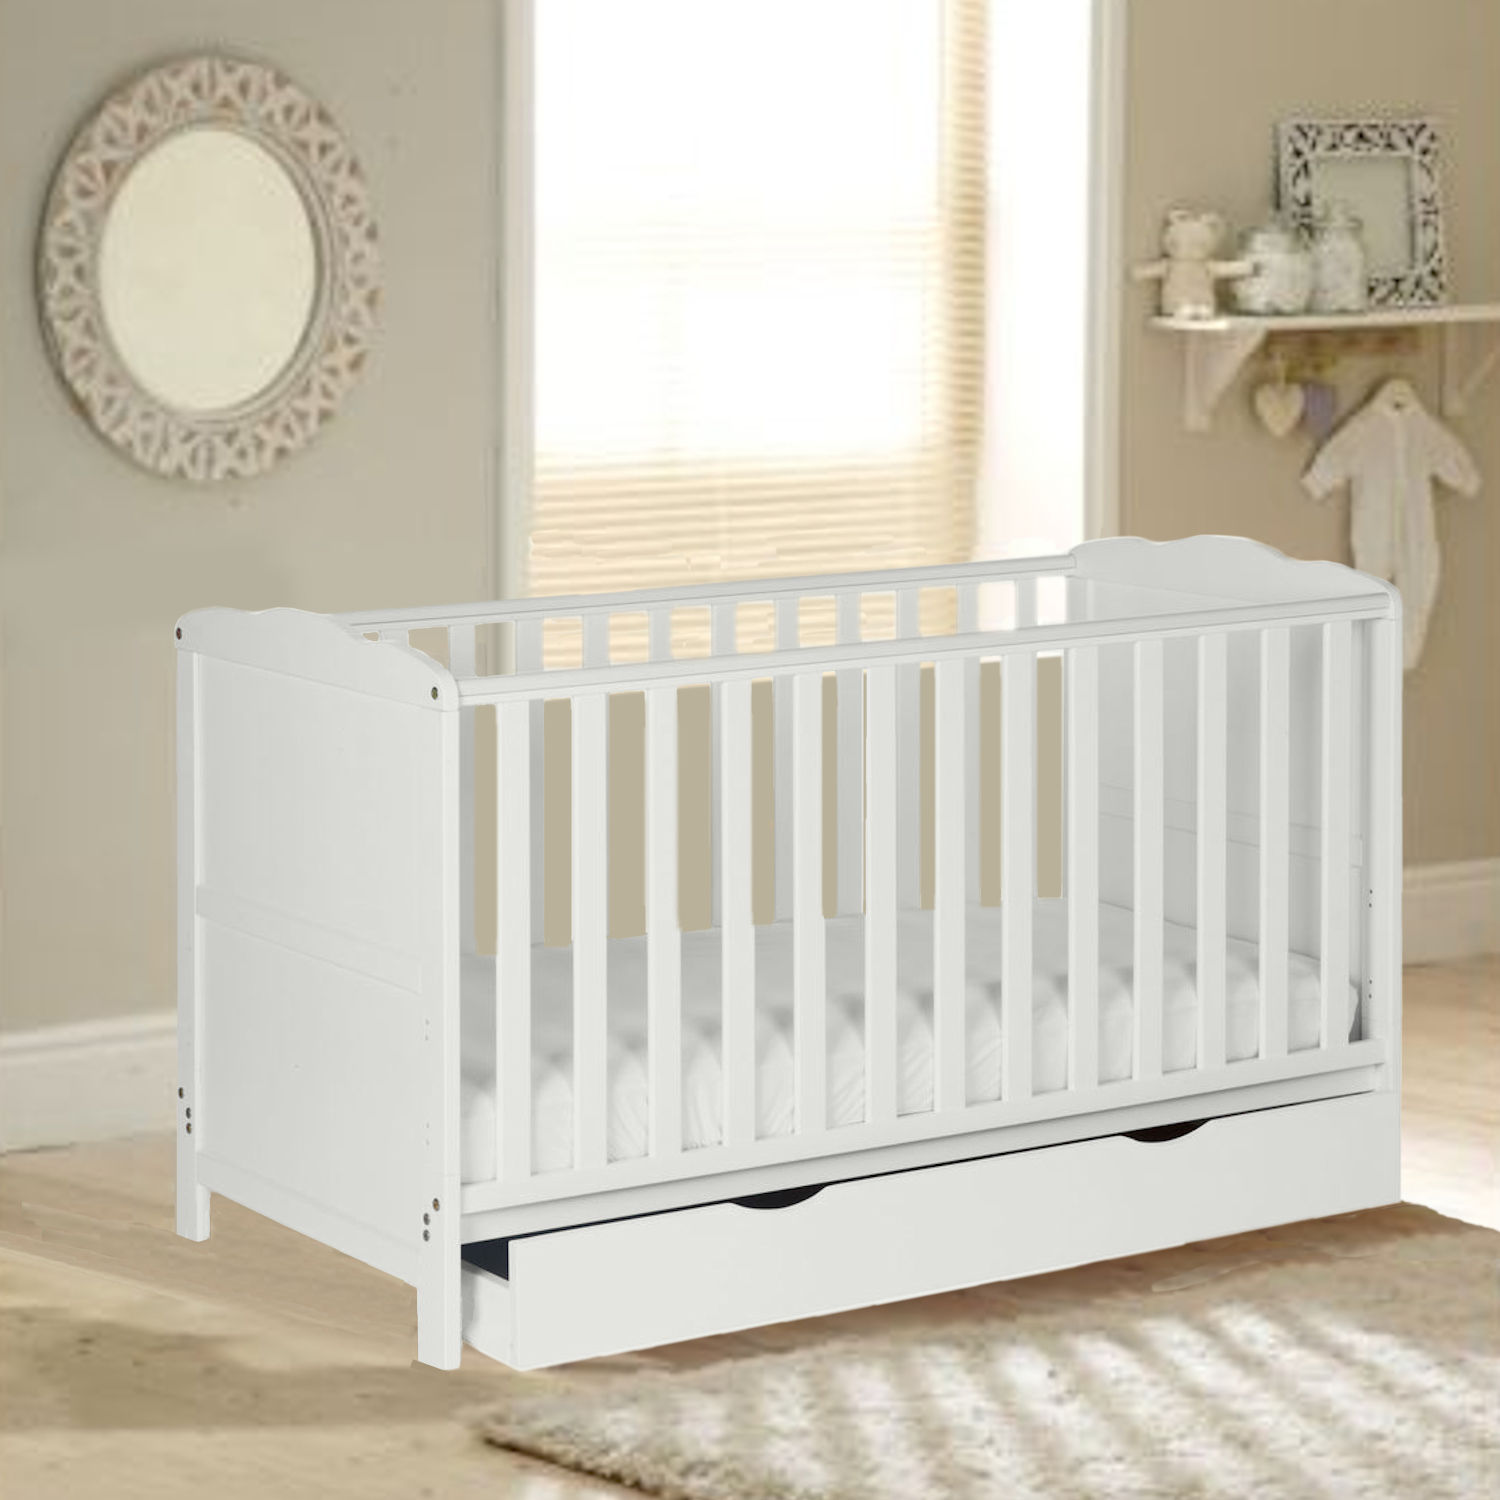 4Baby Classic Cot Bed With Drawer 